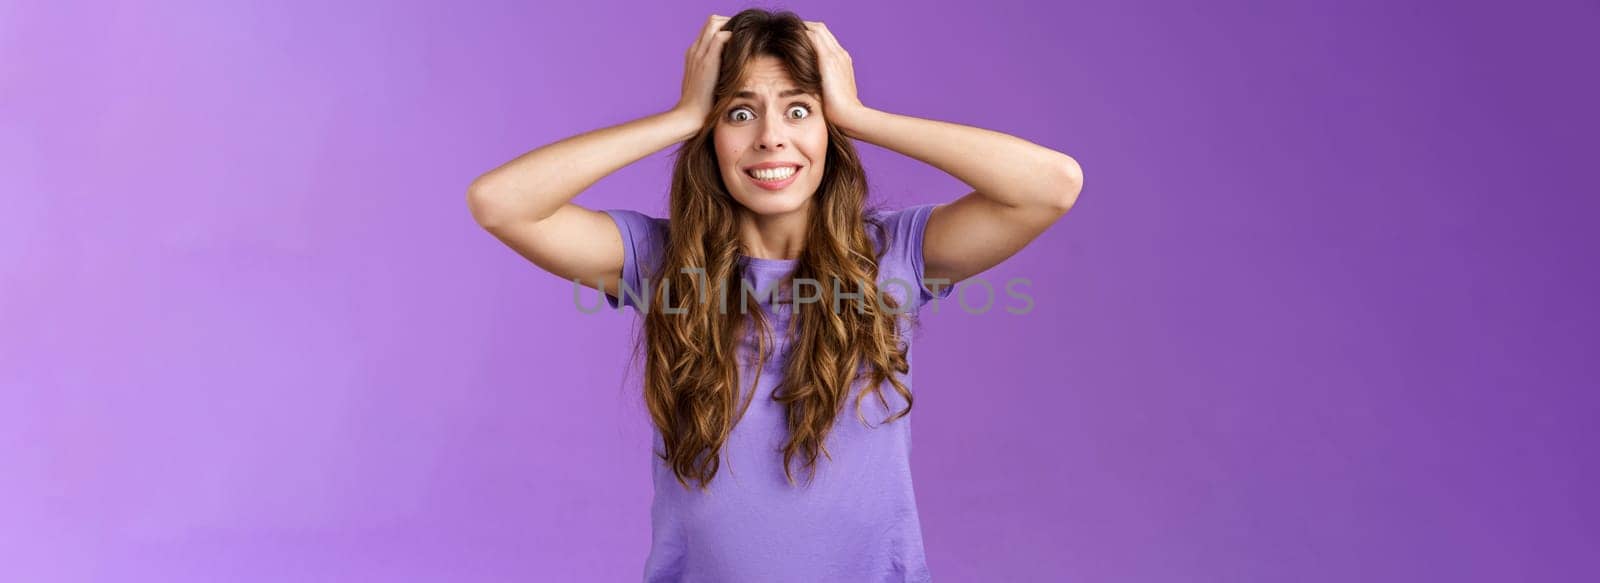 Girl feel panic troublesome perplexed situation clench teeth intense stare camera grab head distressed upset going insane crazy pissed popping eyes feel rage disappointment stand purple background by Benzoix